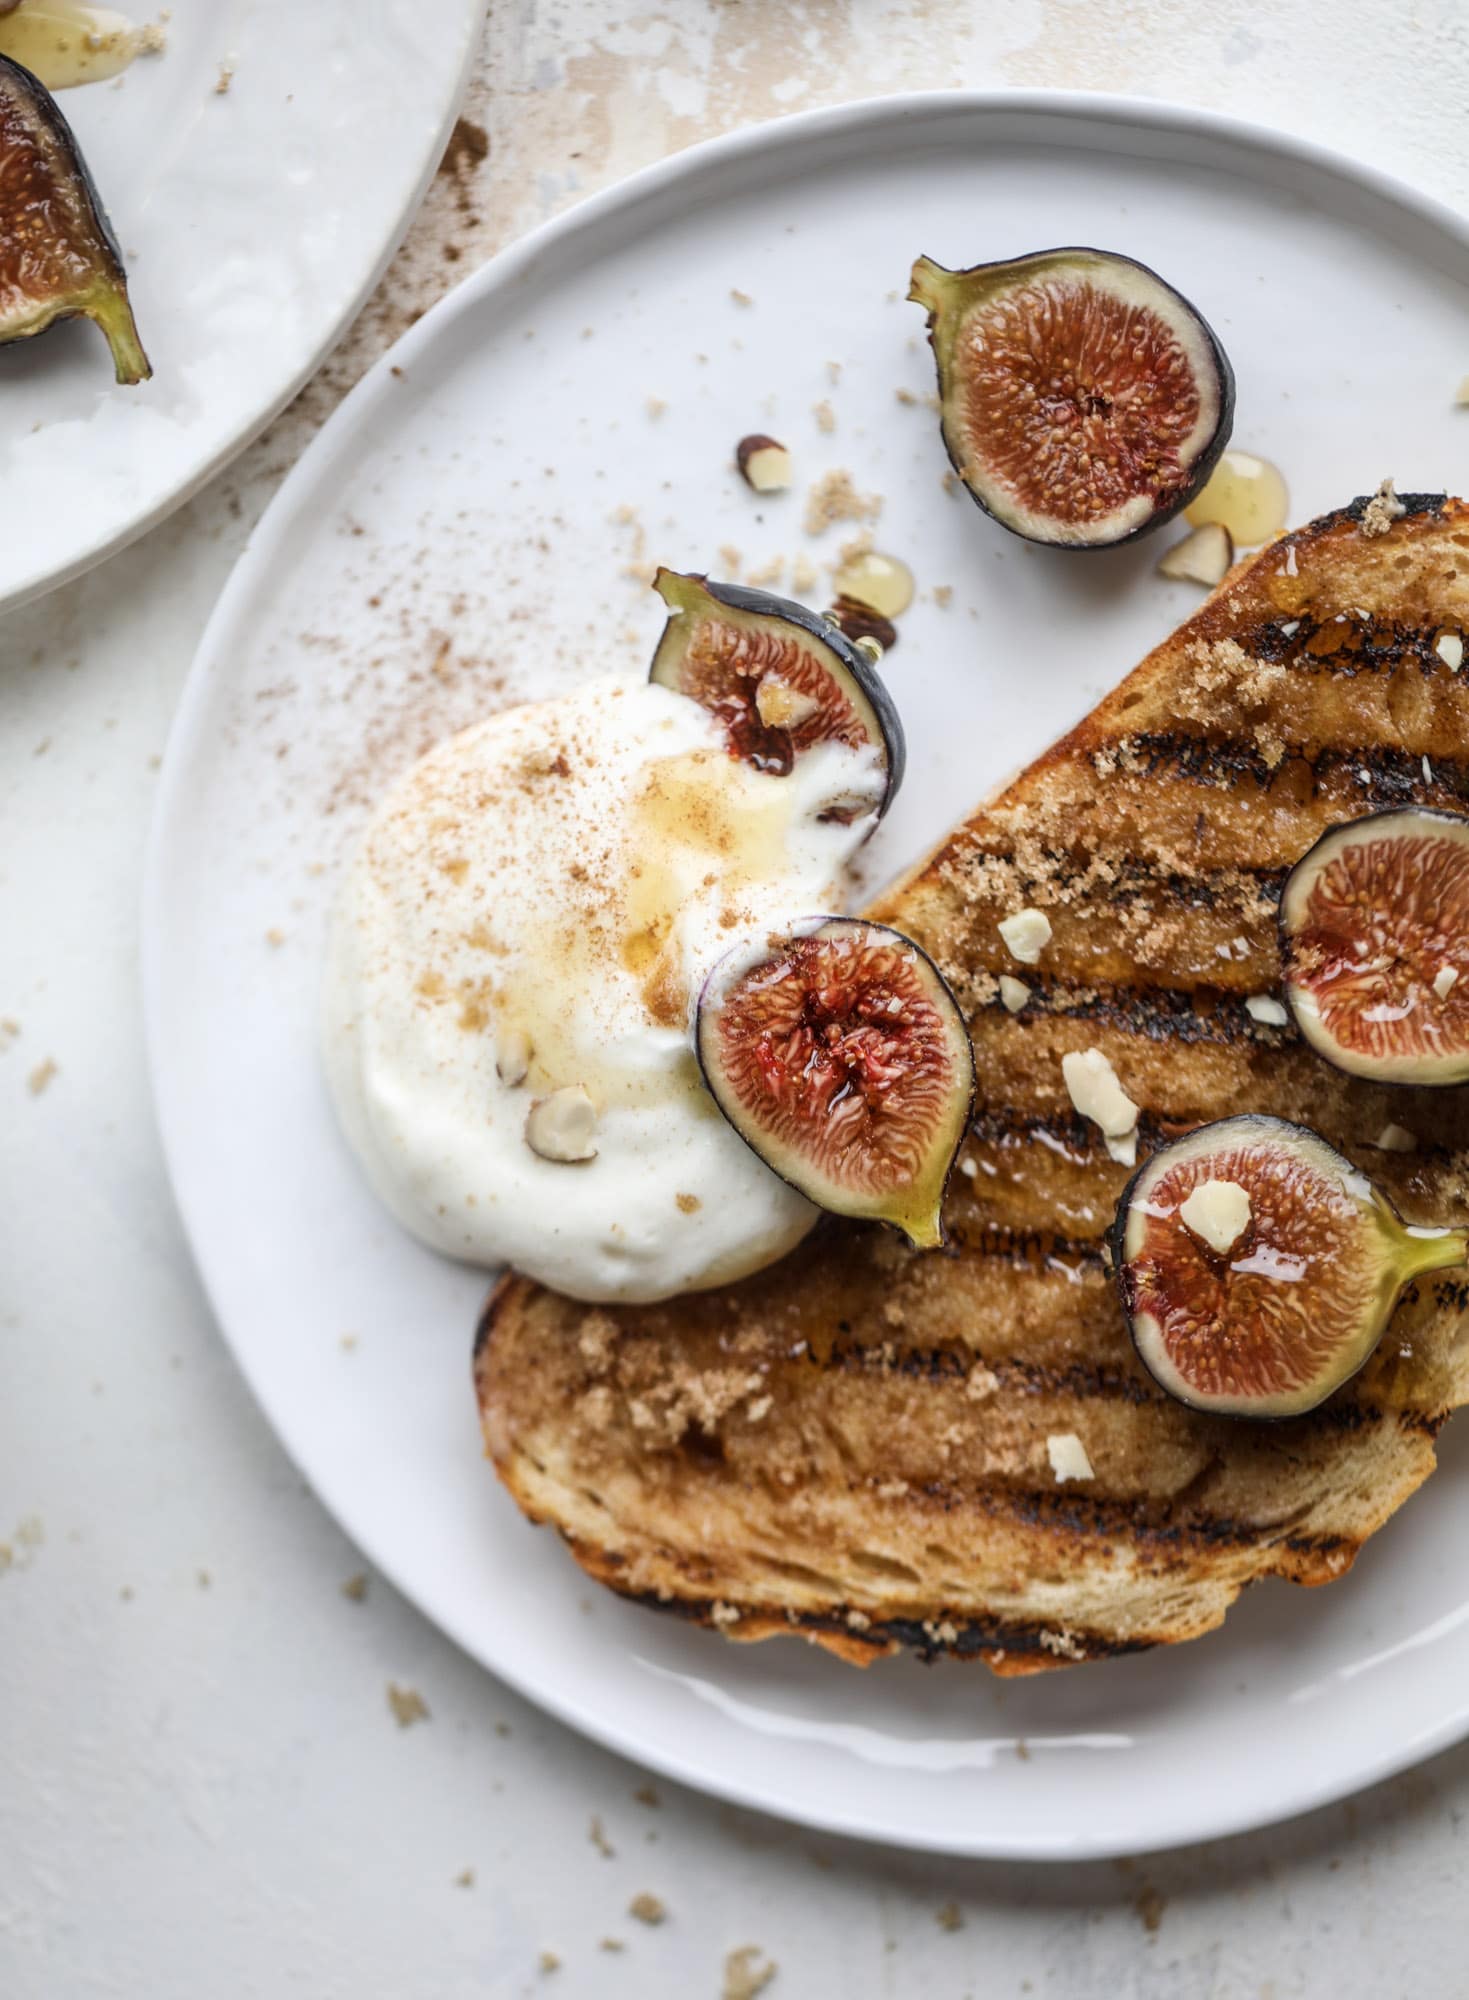 This cinnamon sugar toast is an absolutely dream! It's spread with a cinnamon brown sugar butter, grilled to perfection and served with creamy whipped ricotta cheese, fresh figs, honey, cinnamon and sliced almonds. I howsweeteats.com #cinnamon #sugar #toast #ricotta #figs #breakfast